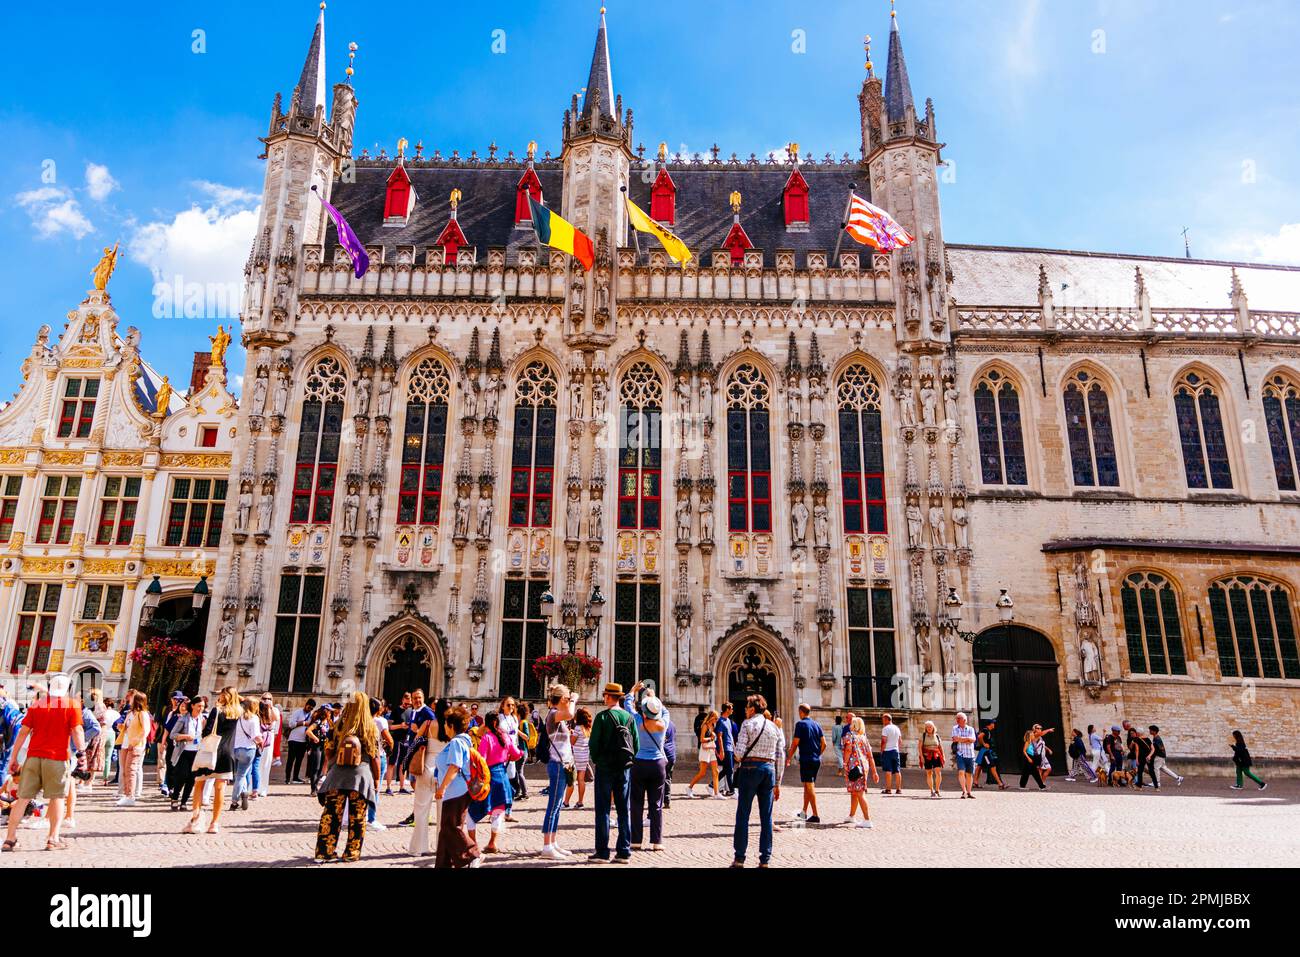 The City Hall of Bruges is one of the oldest city halls in the entire Netherlands region. It is located on Burg Square, the area of the former fortifi Stock Photo